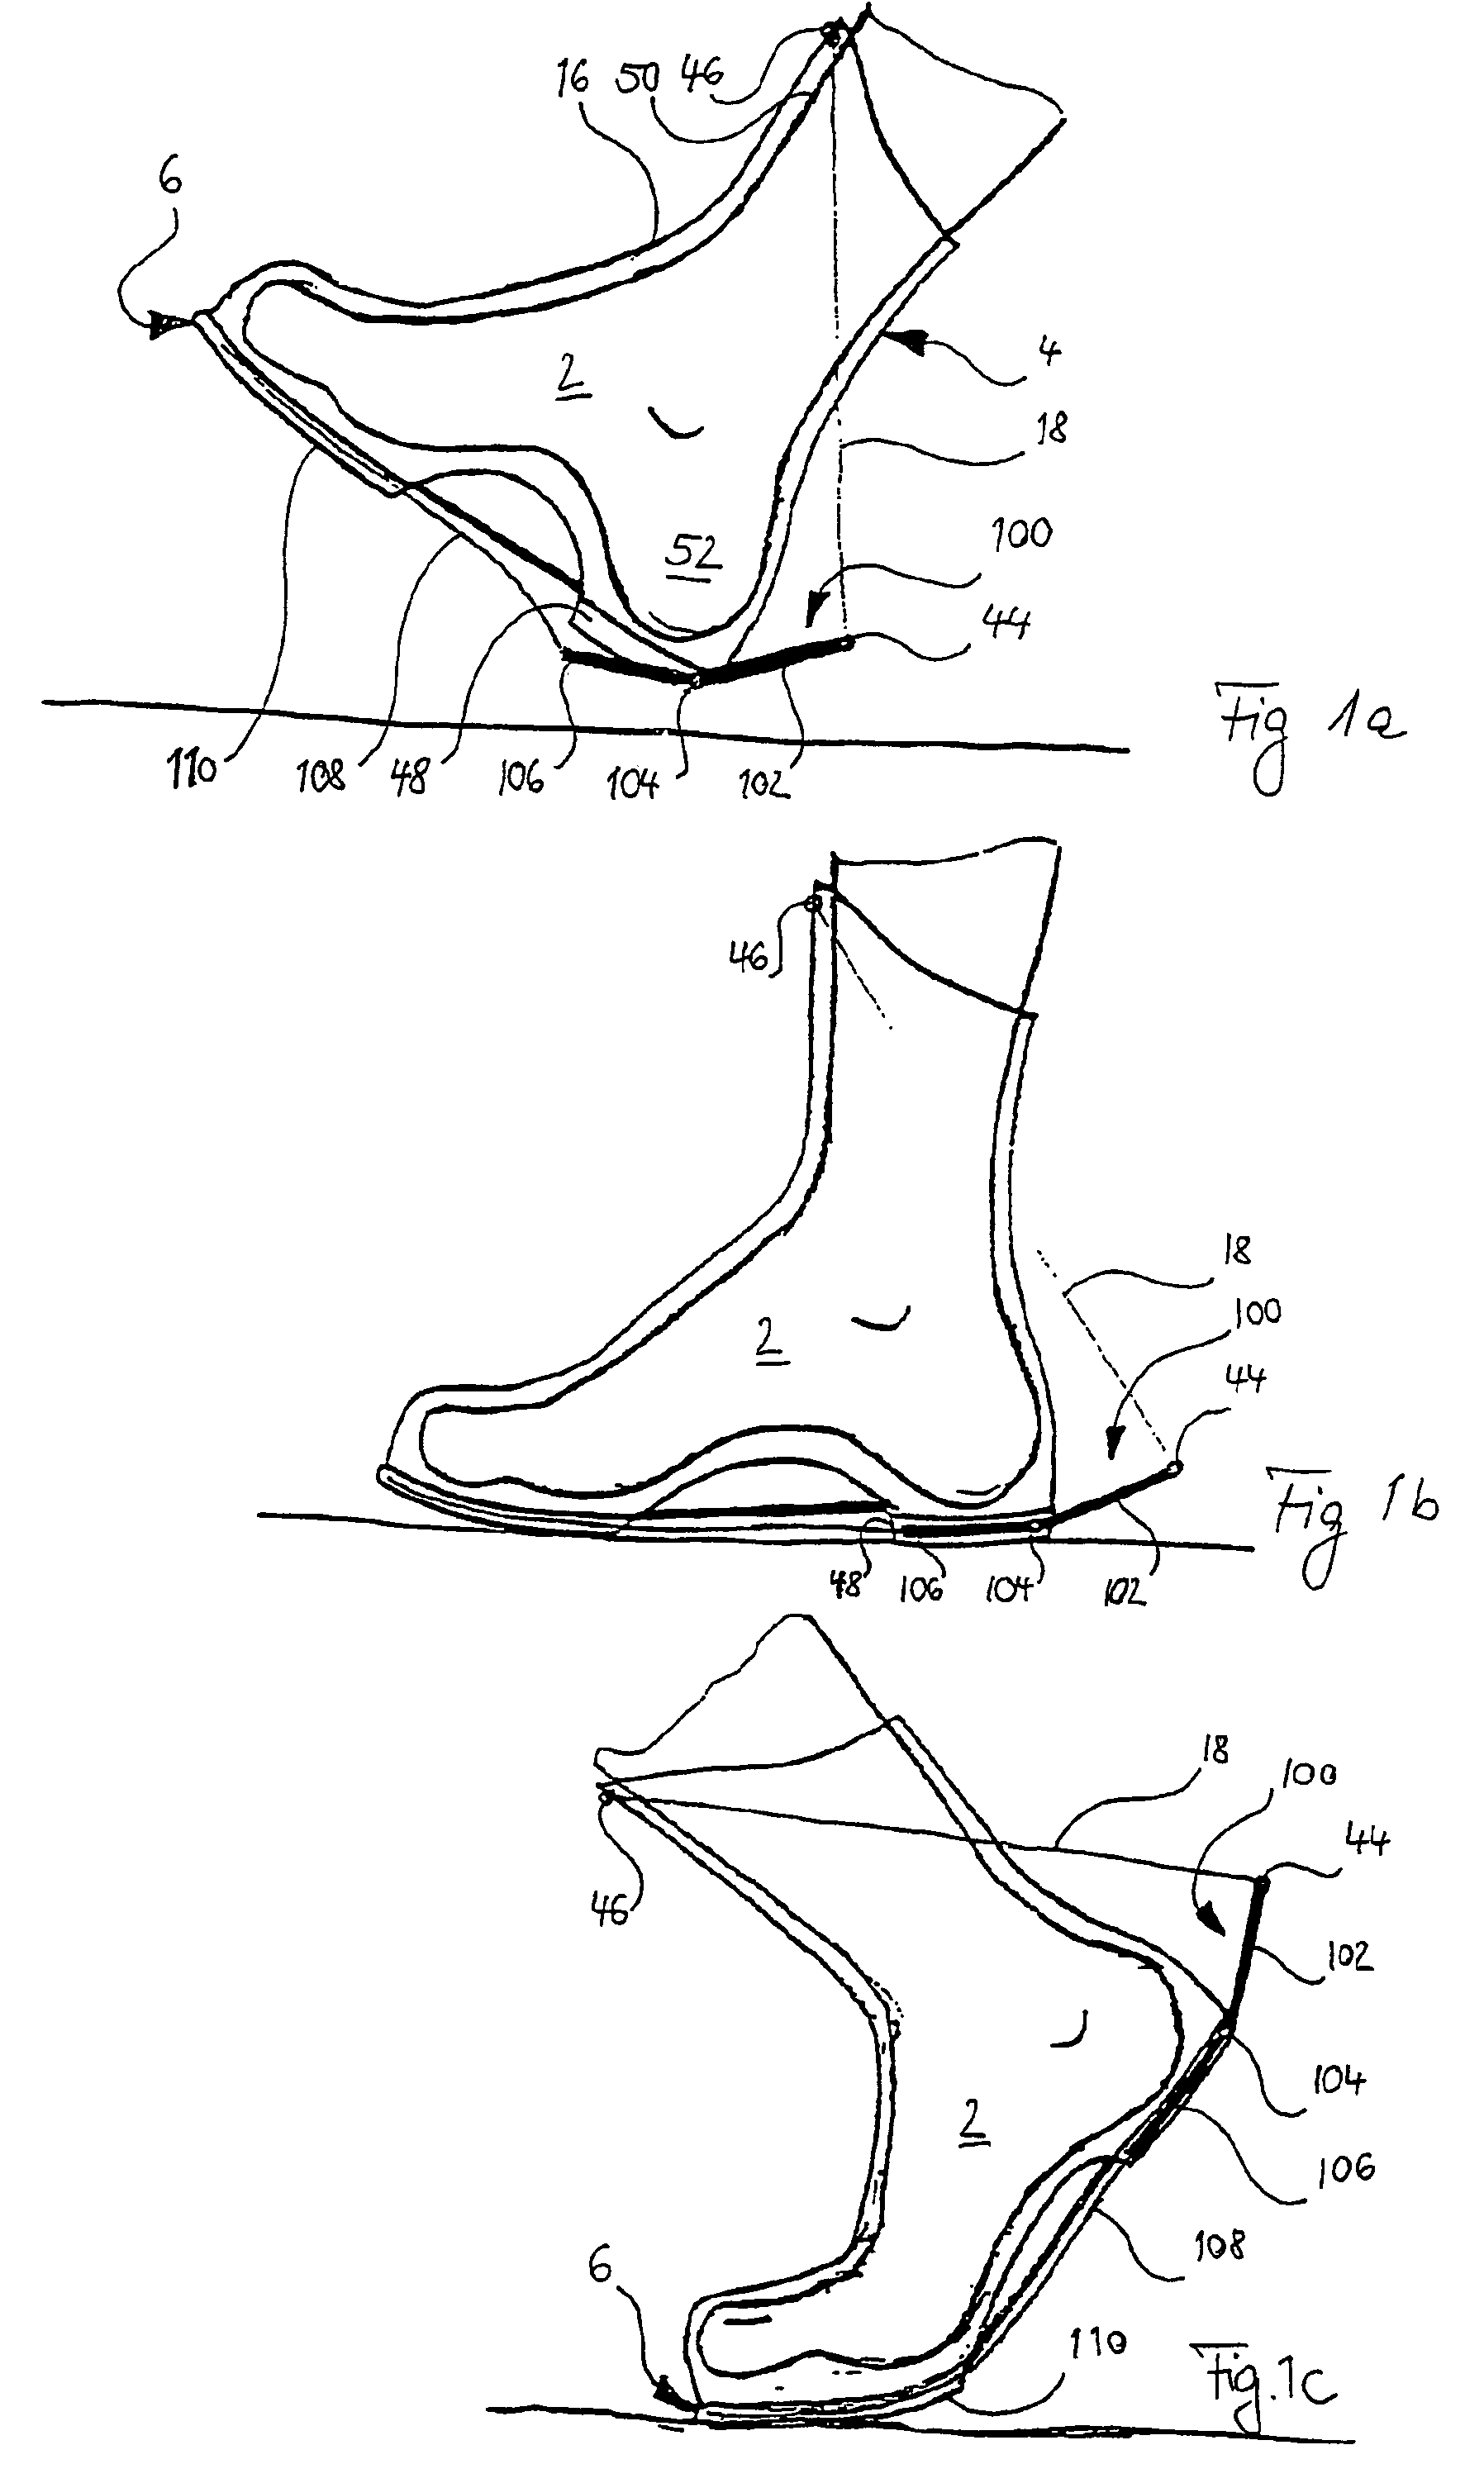 Shoe with energy storage and delivery device